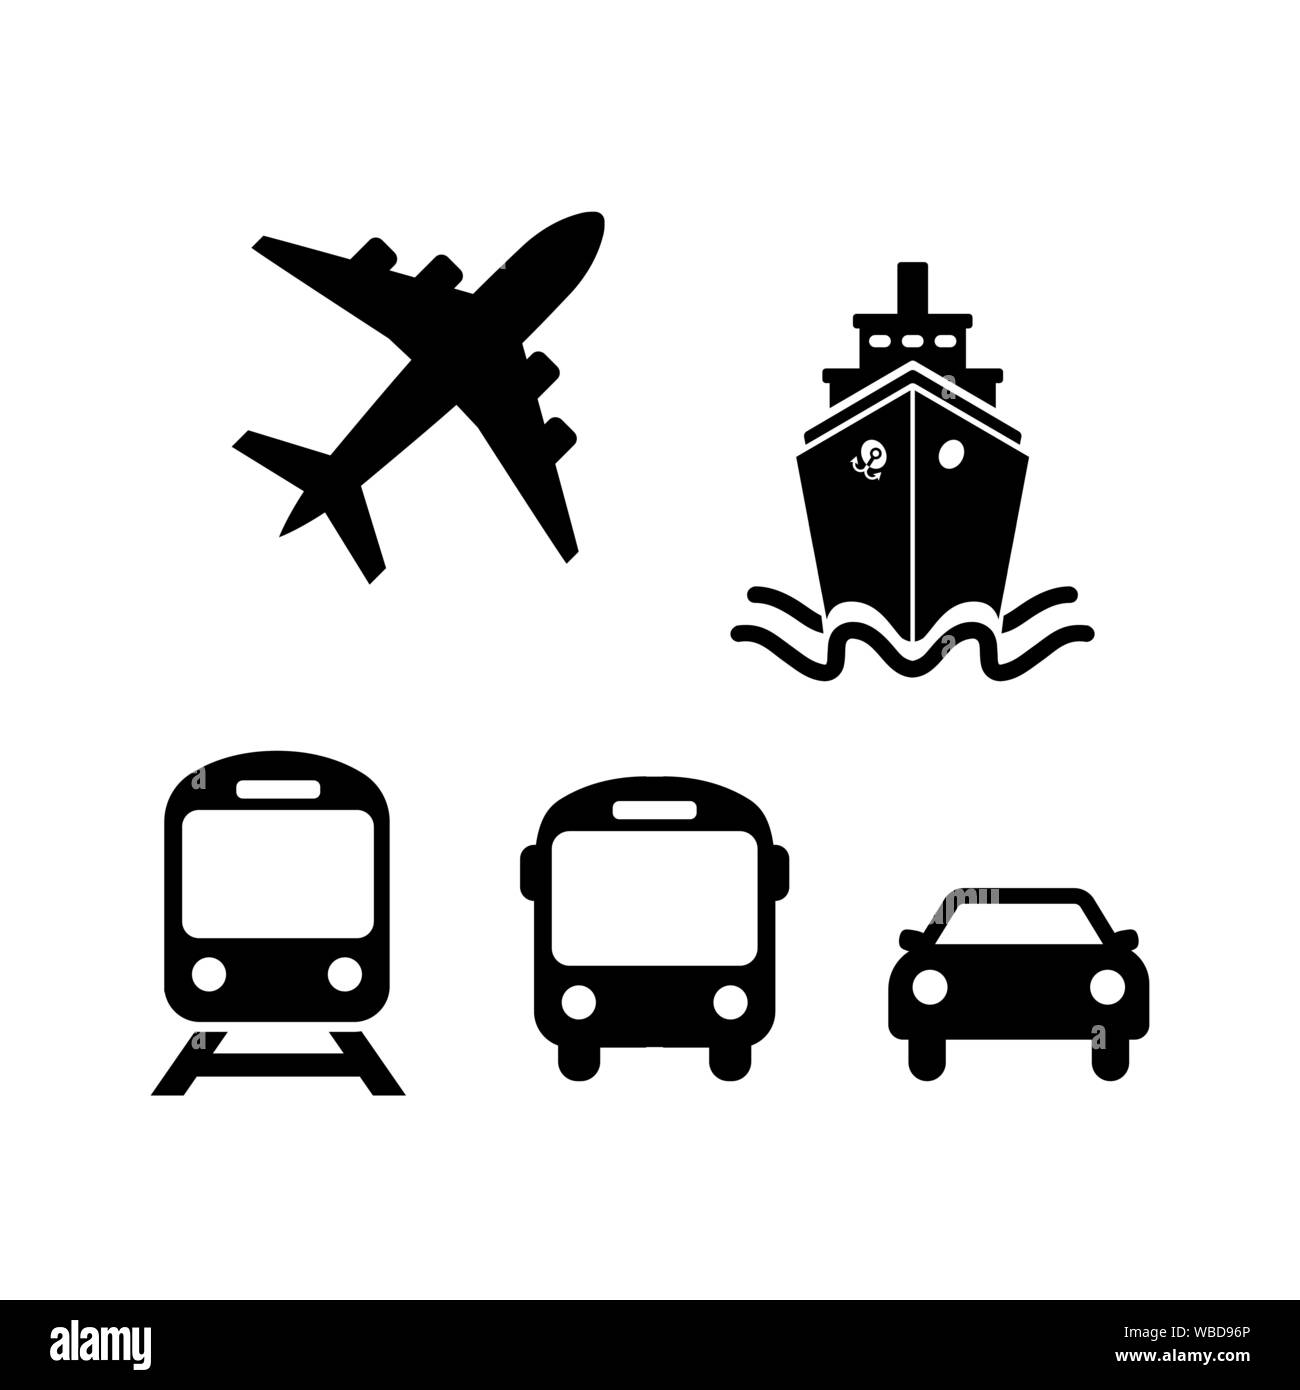 Transport icons. Airplane, Ship or Ferry, Train, Public bus, and auto symbols in flat style. Shipping delivery symbol isolated on white background. Ve Stock Vector